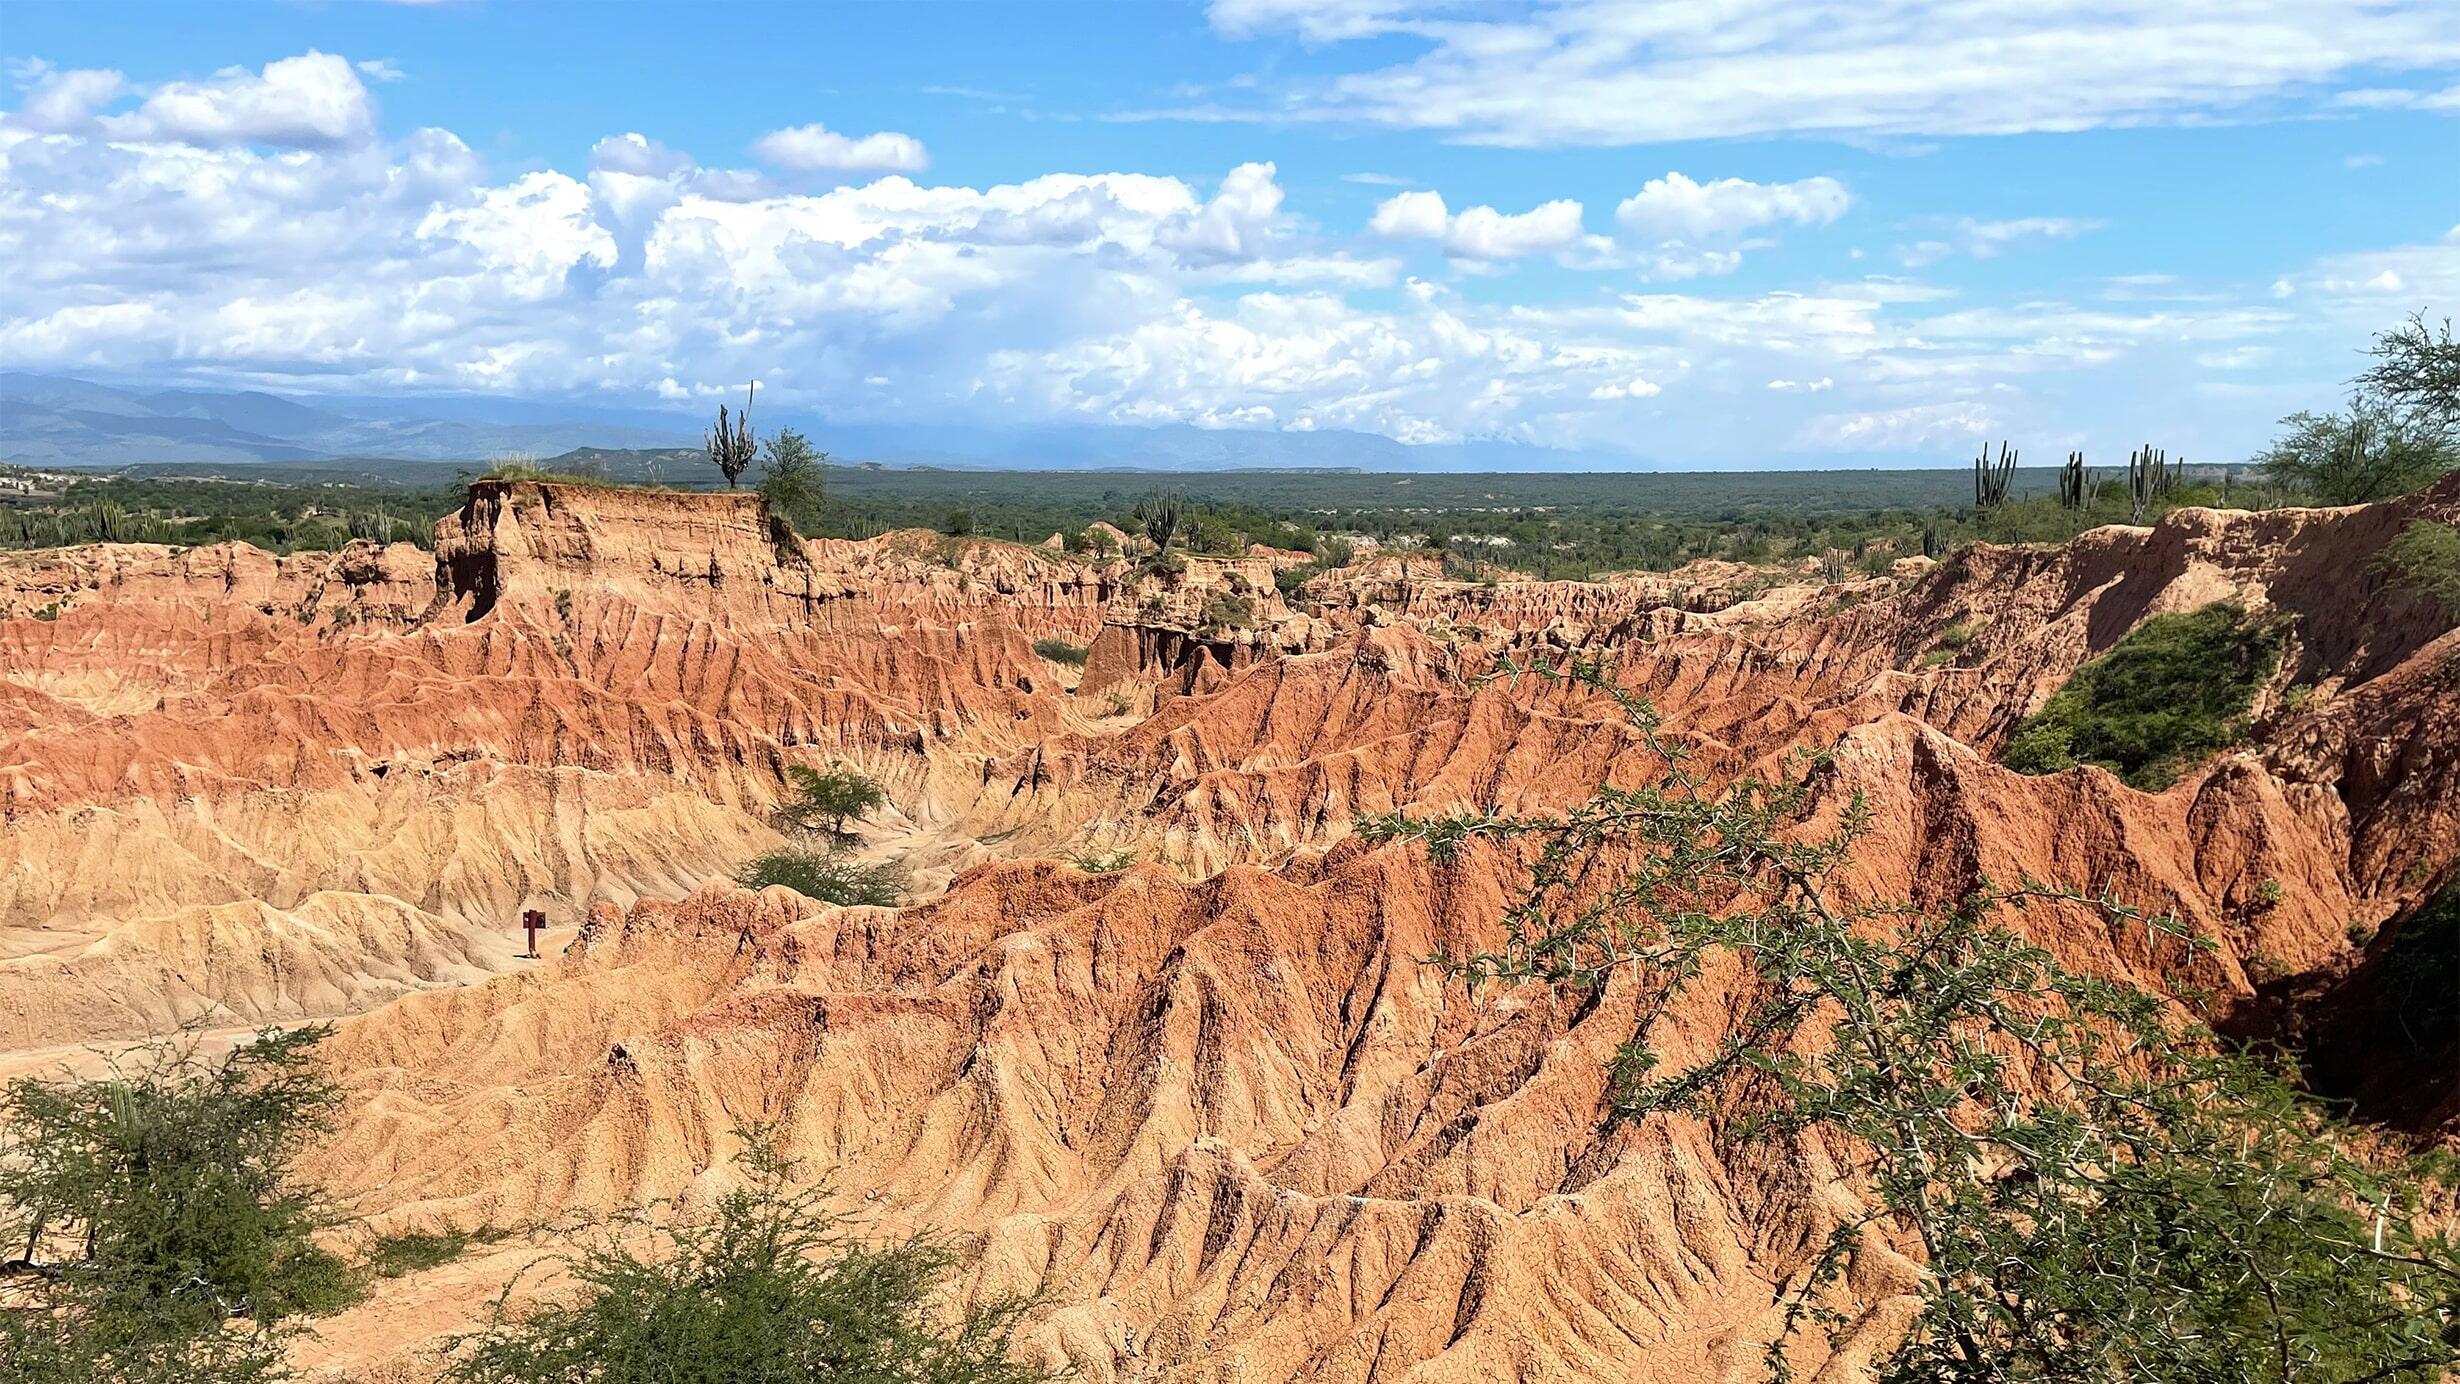 A panoramic view of a recessed canyon, with red rock formations, at the La Venta fossil site in Colombia.